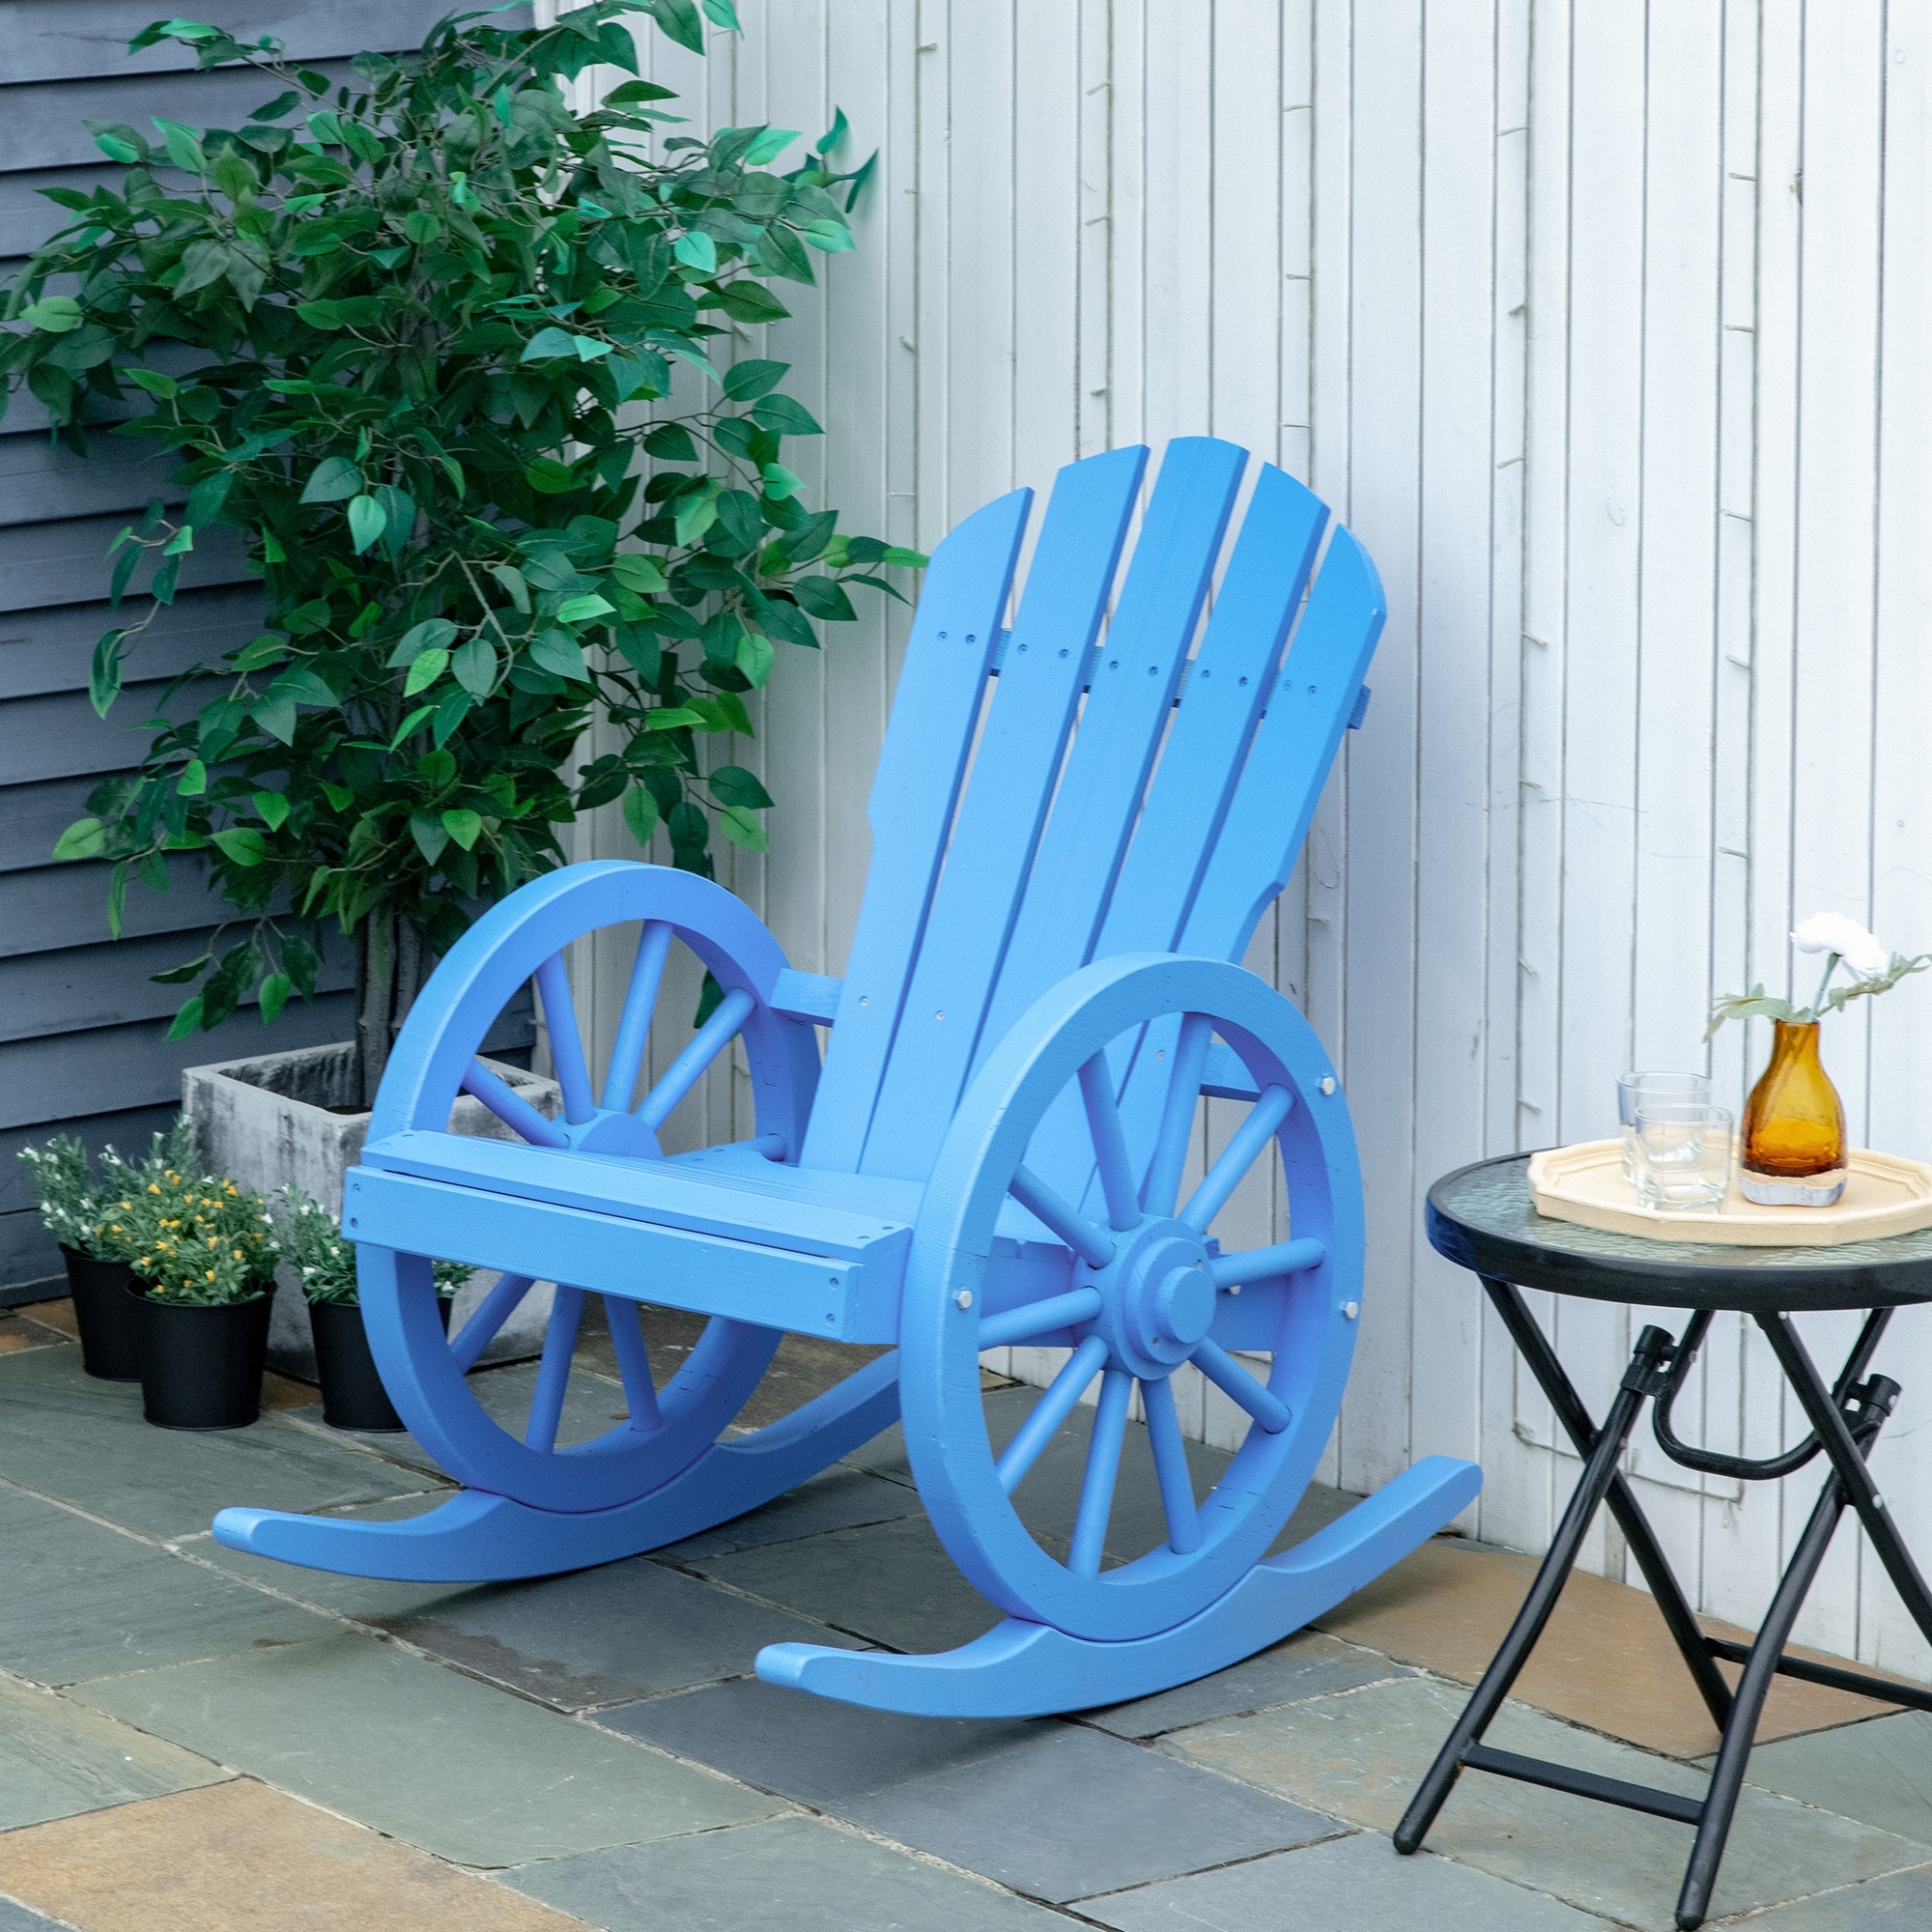 Outsunny Adirondack Rocking Chair With Slatted Design And Oversize Back For Porch  Poolside  Or Garden Lounging